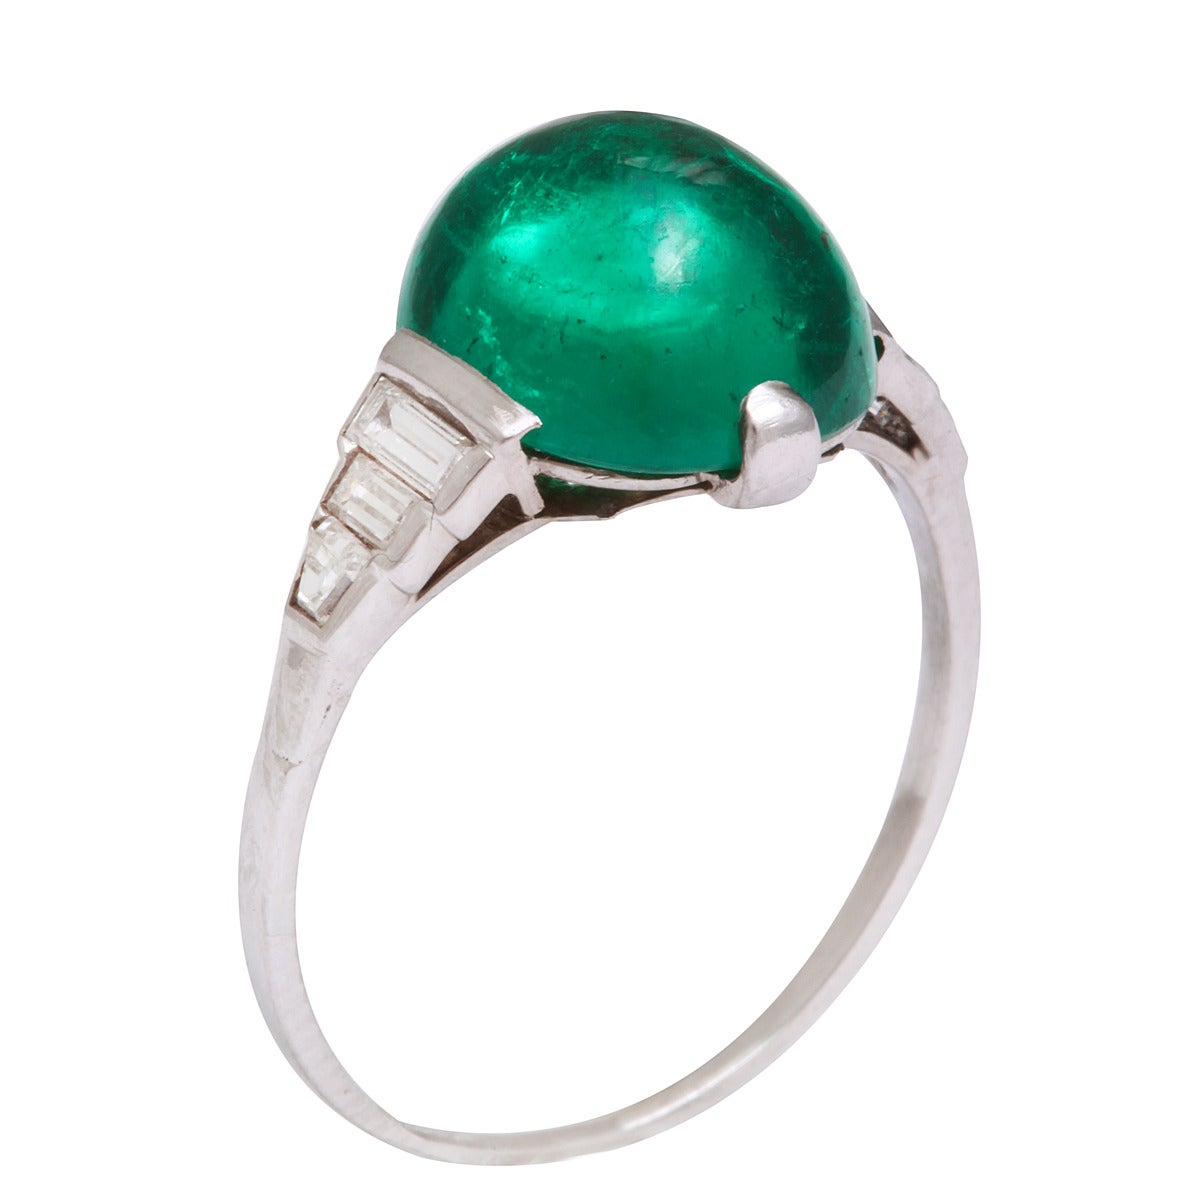 Cabochon emerald ring set in platinum and diamond mount.

English, ca. 1900
(Emerald approx. 4.3 cts)